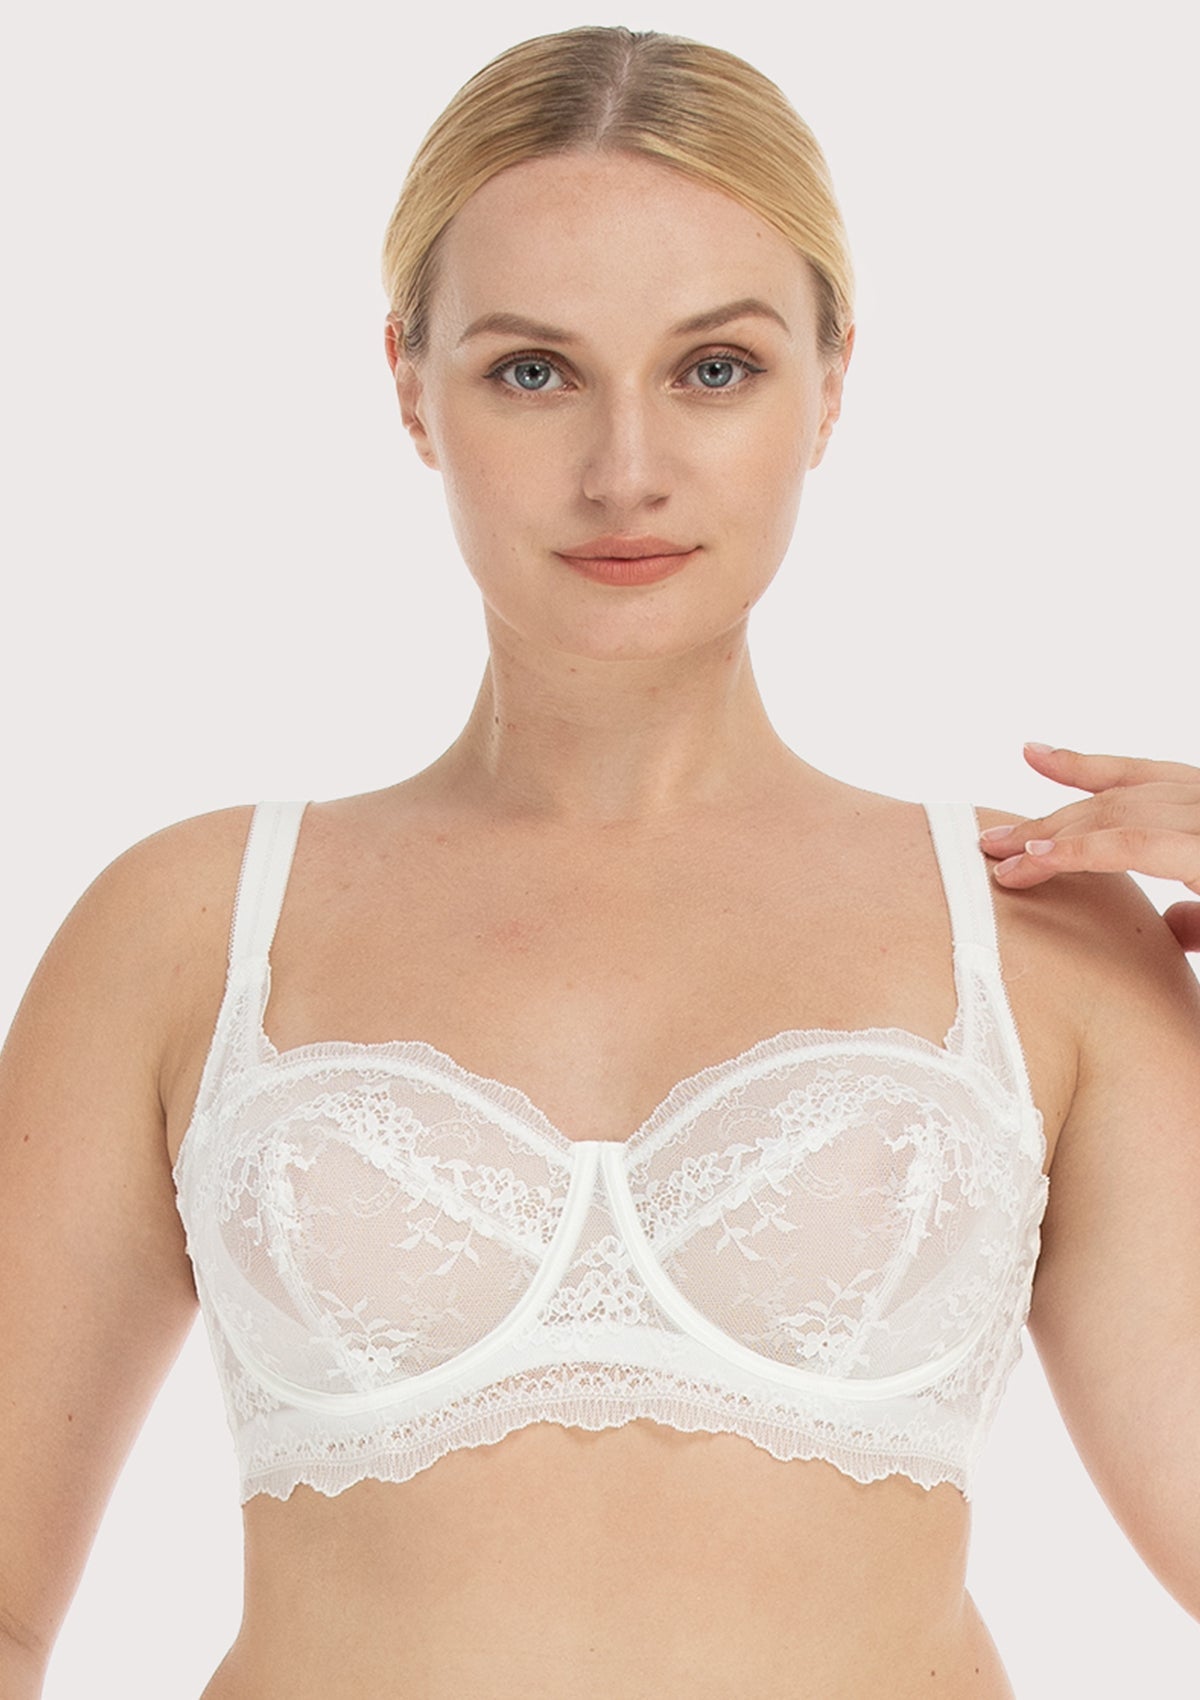 HSIA I Do Floral Lace Bridal Balconette Beautiful Bra For Special Day - Pink / 42 / D